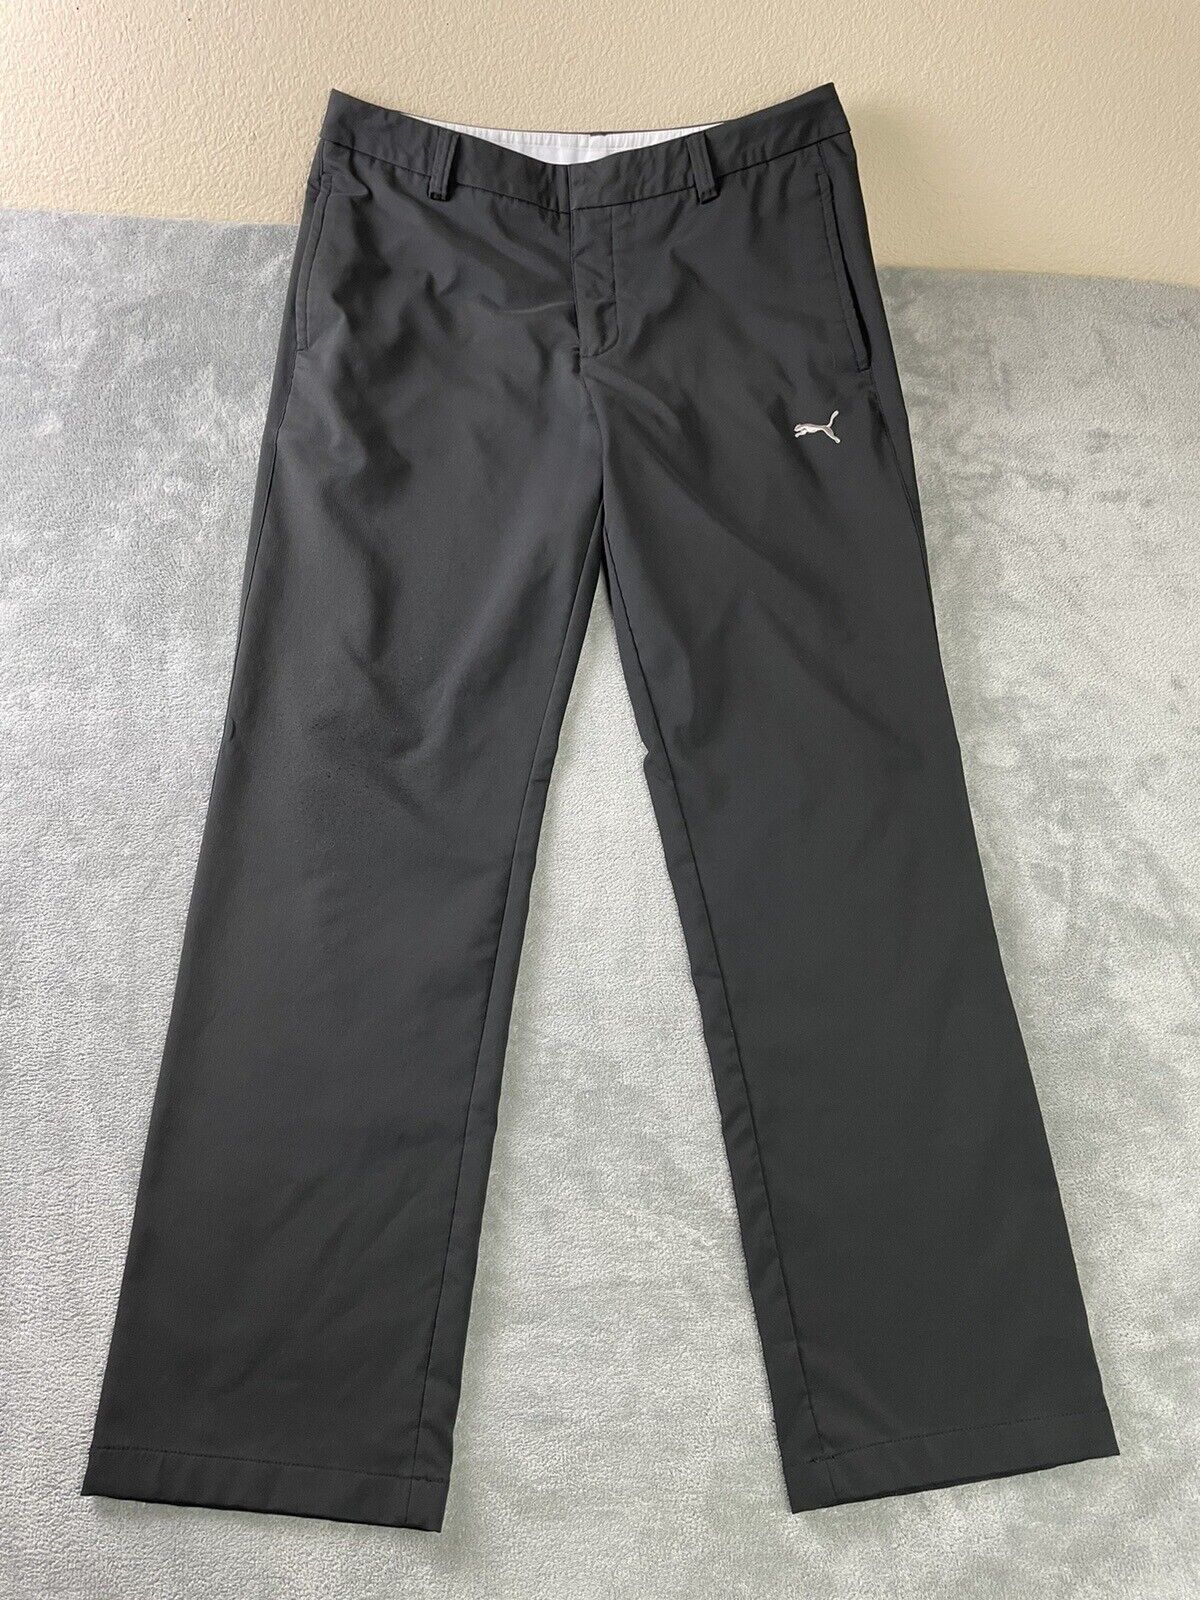 PUMA Dry Cell Golf Pants Mens Size 34x32 (30) Black Athletic •snags•